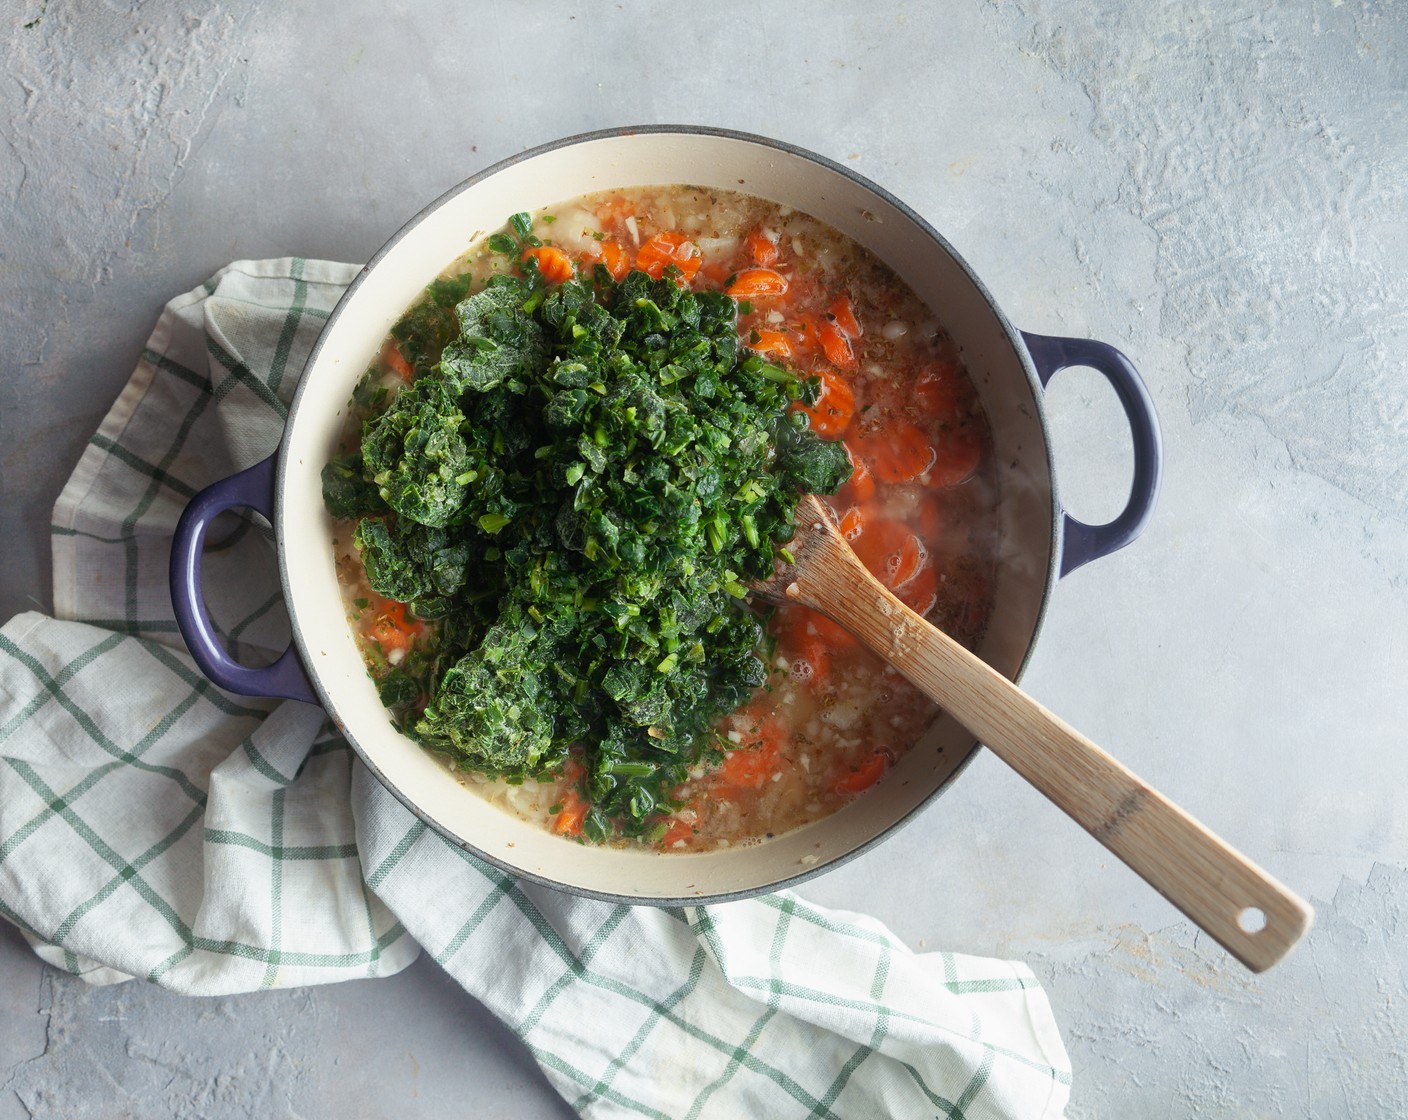 step 3 Stir in the Kale (1 pckg) and Shaved Parmesan Cheese (1/4 cup). Cook for 3-4 minutes, or until warmed through.